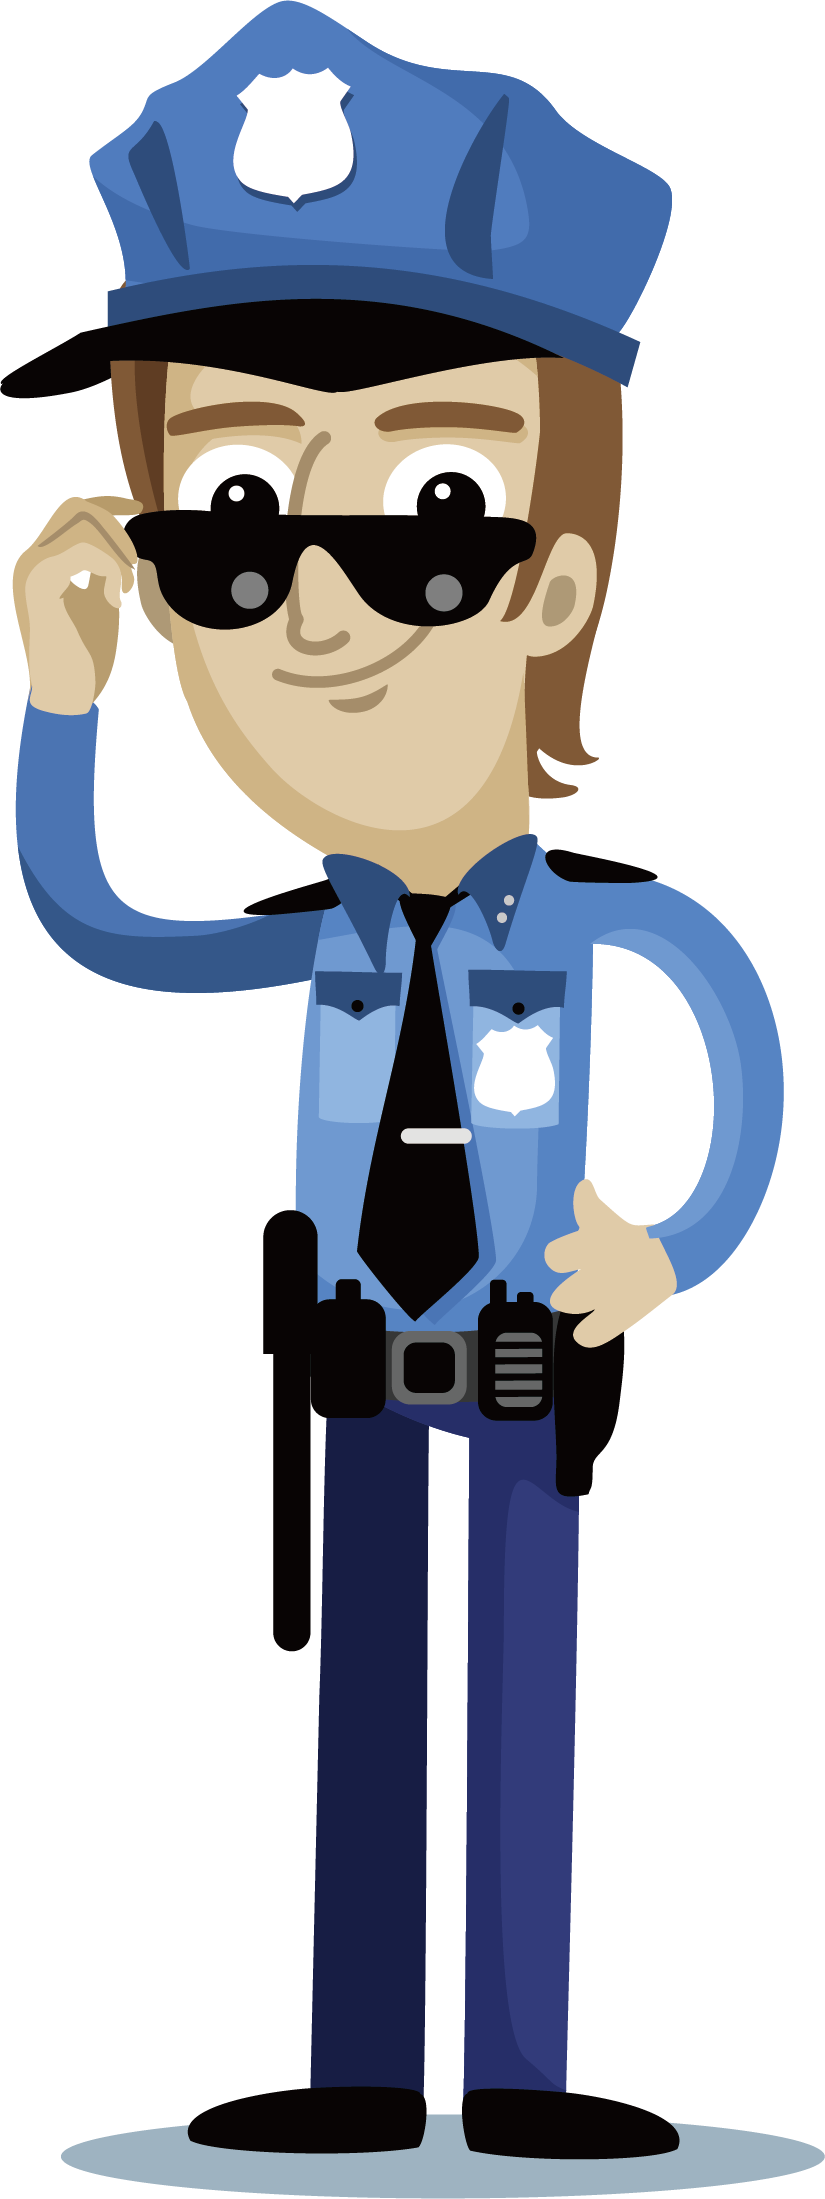 Wearing Sunglasses Of Officer Police The Cartoon Clipart